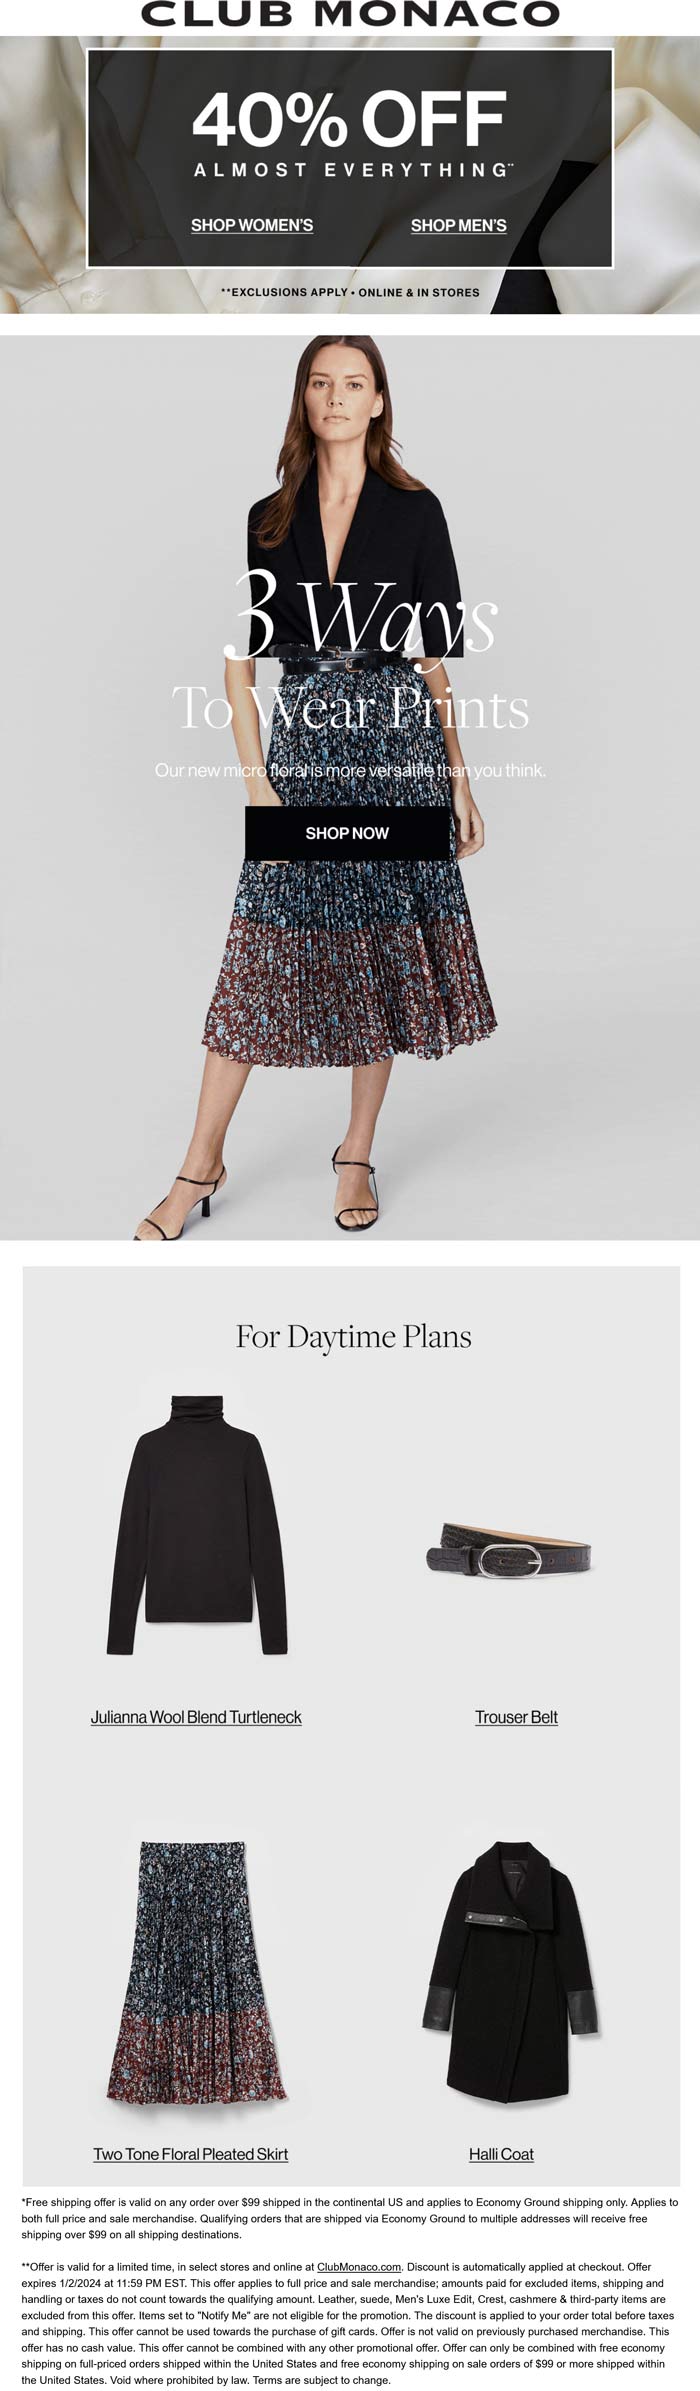 40% off everything at Club Monaco, ditto online #clubmonaco